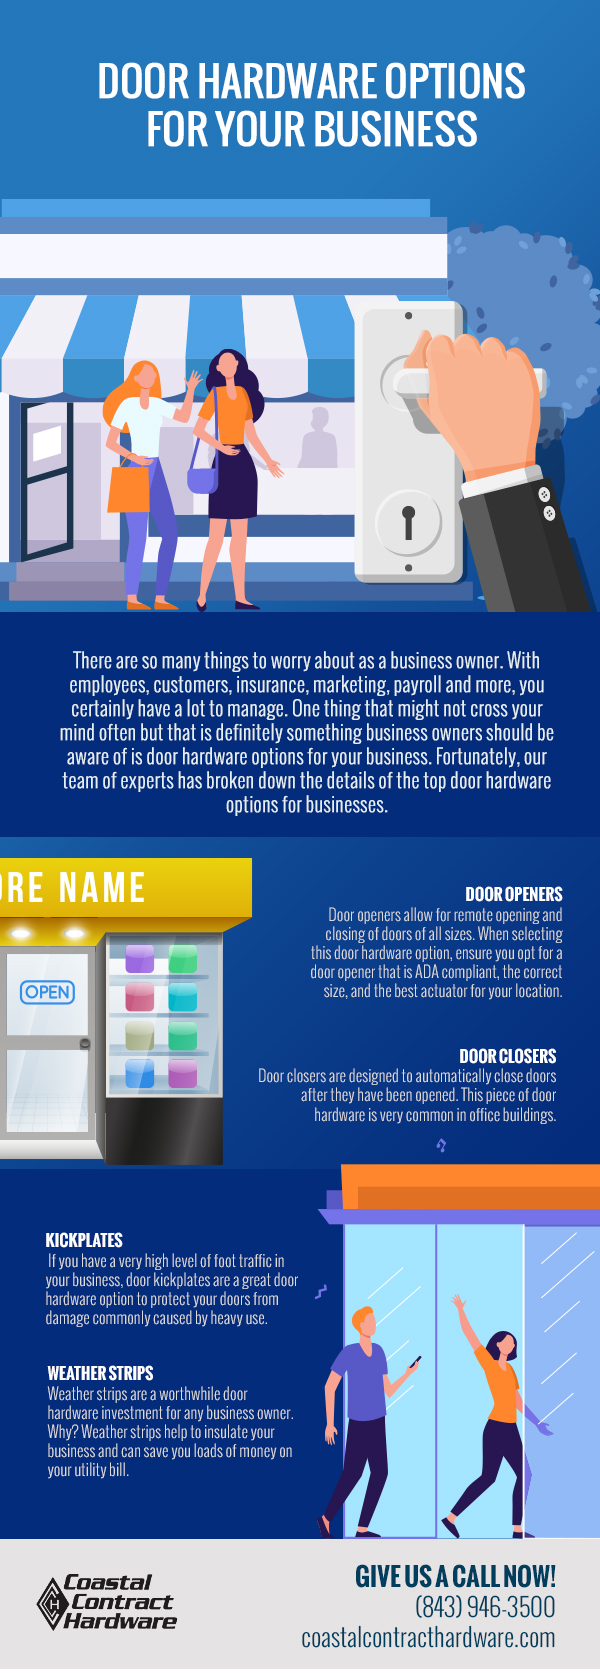 Door Hardware Options for Your Business [infographic]